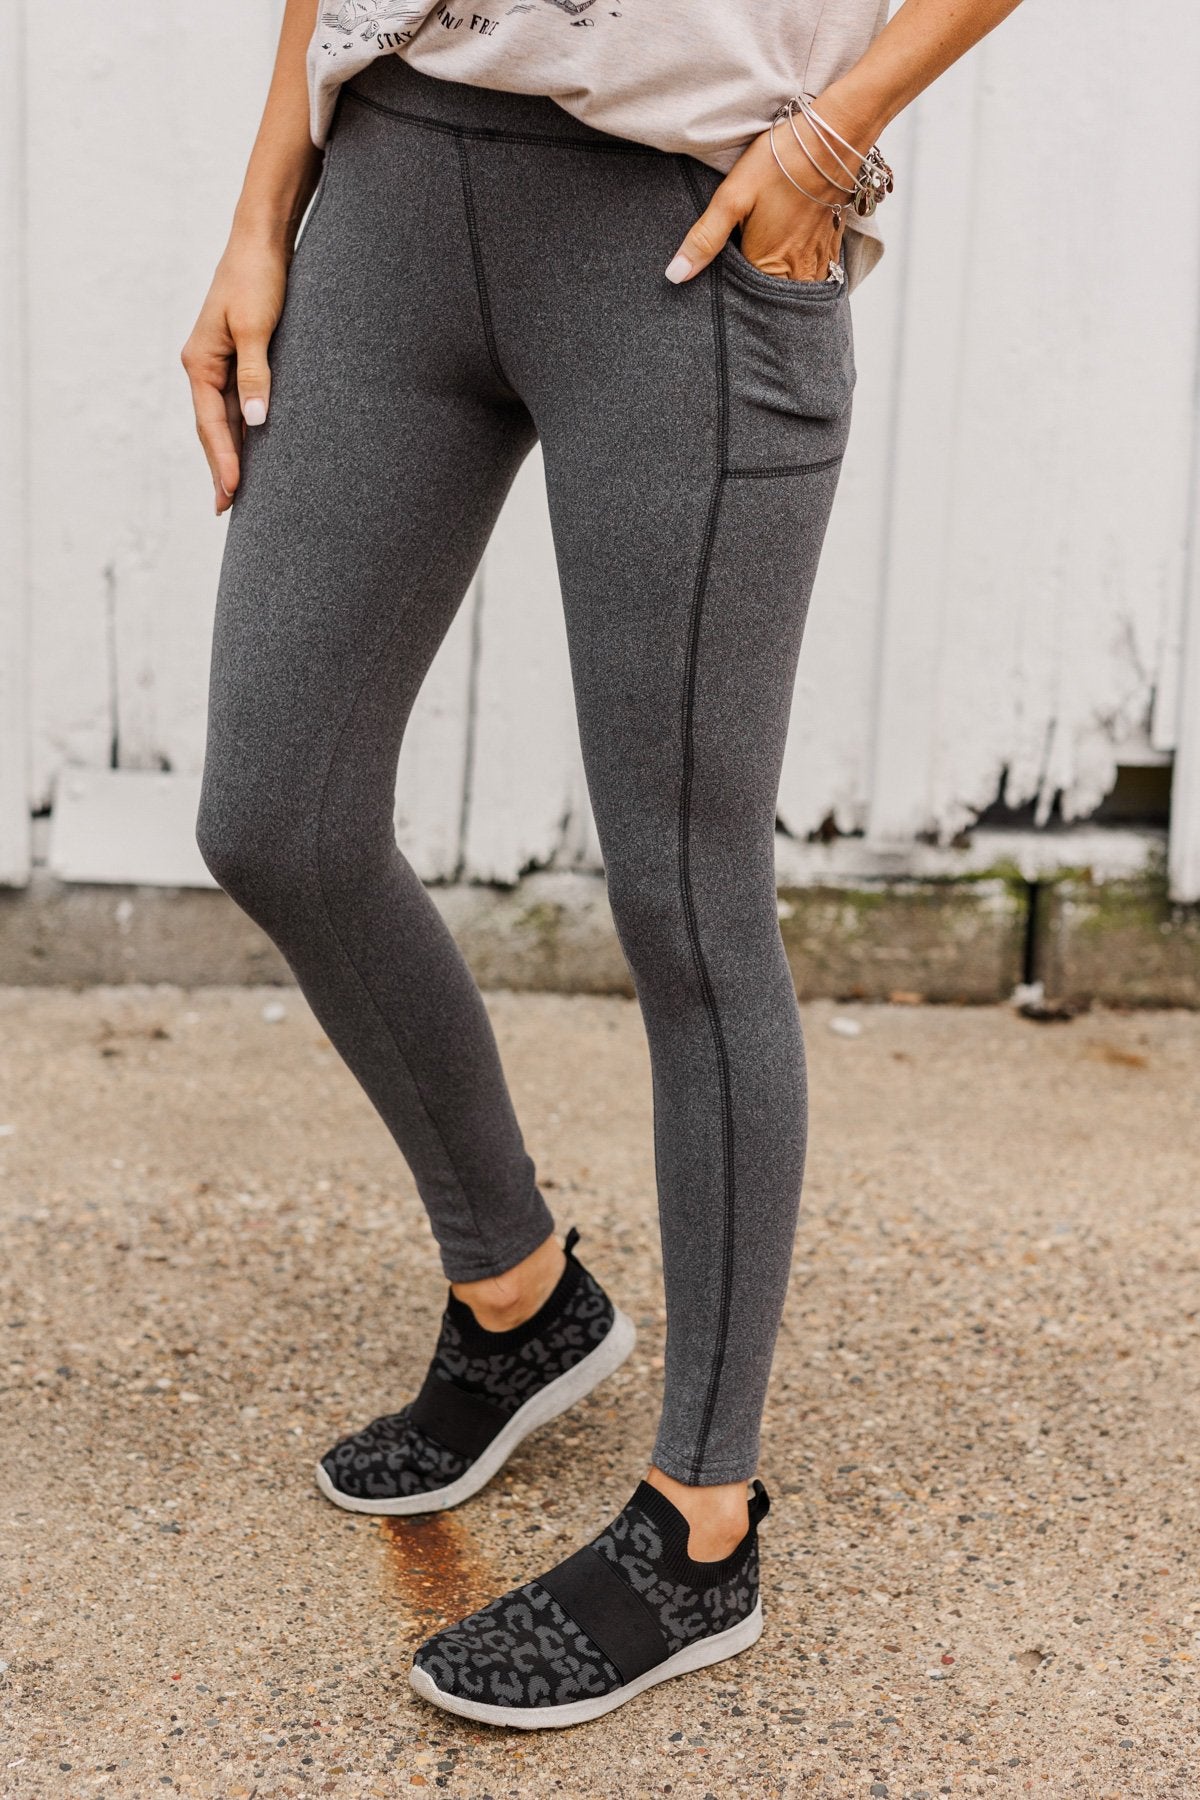 Woestijn Observatorium Inconsistent Every Step Of The Way Thick Fleece Leggings- Charcoal – The Pulse Boutique